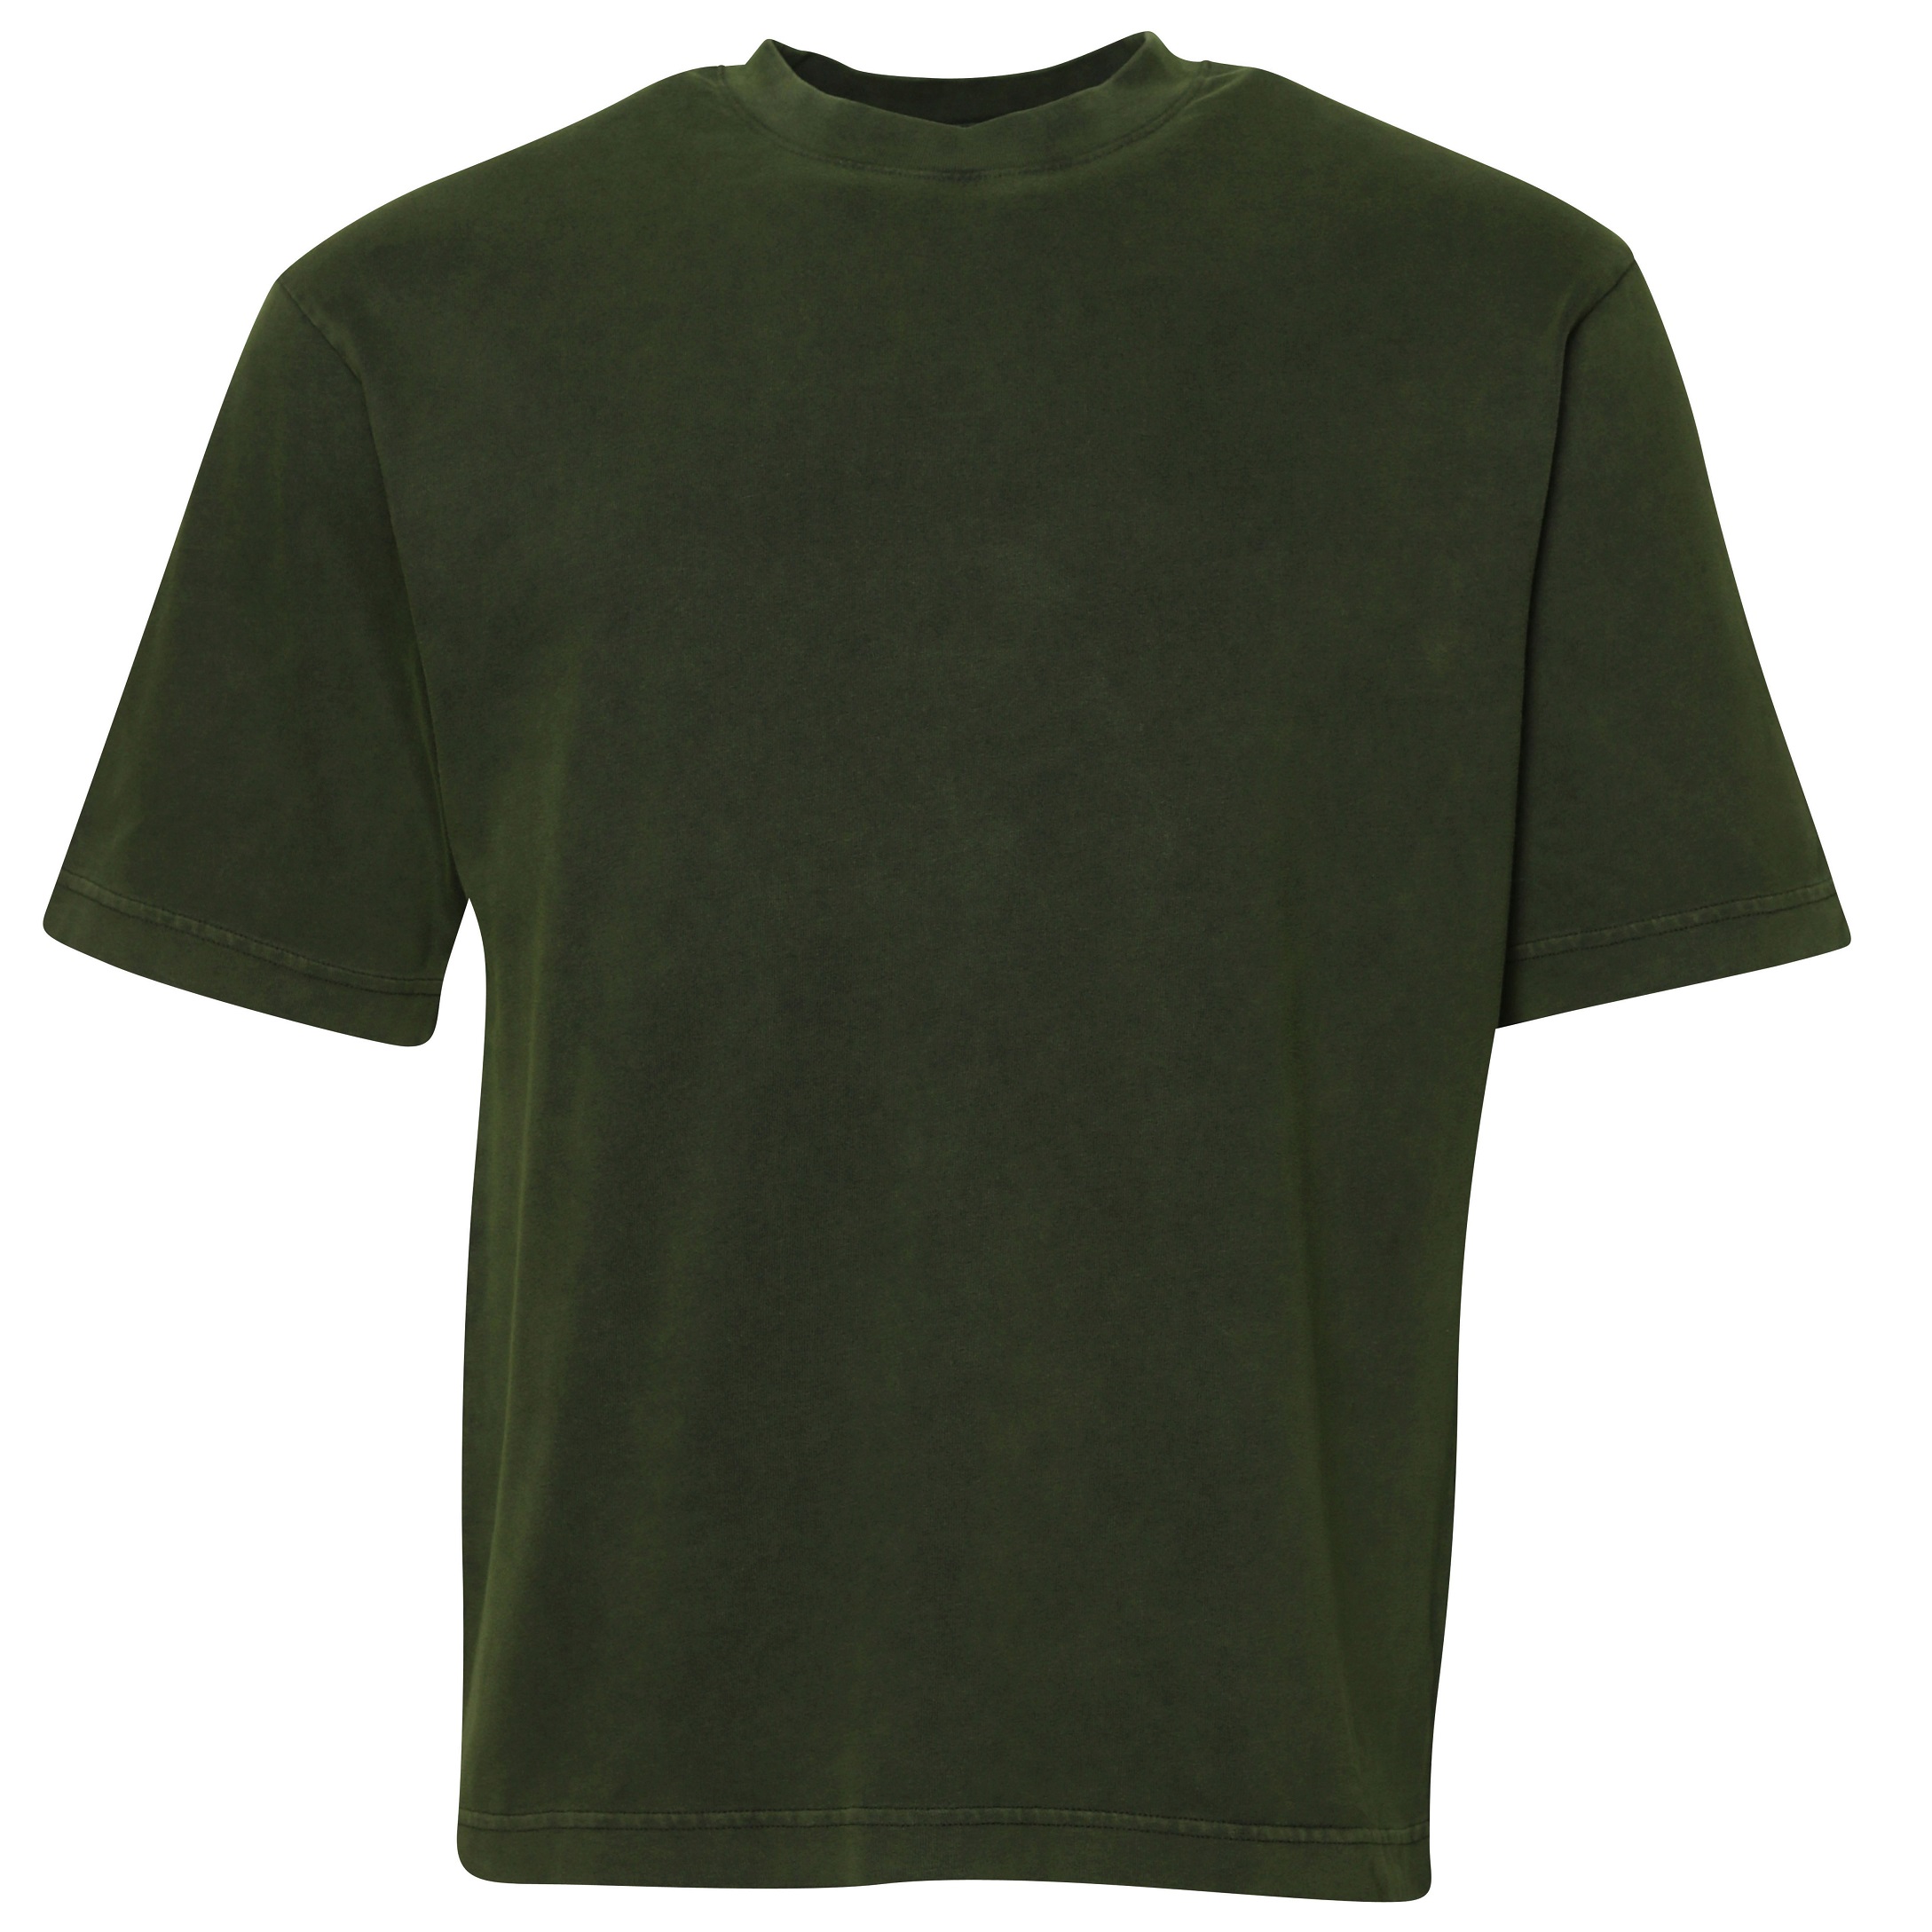 Acne Studios Vintage T-Shirt in Moss Green